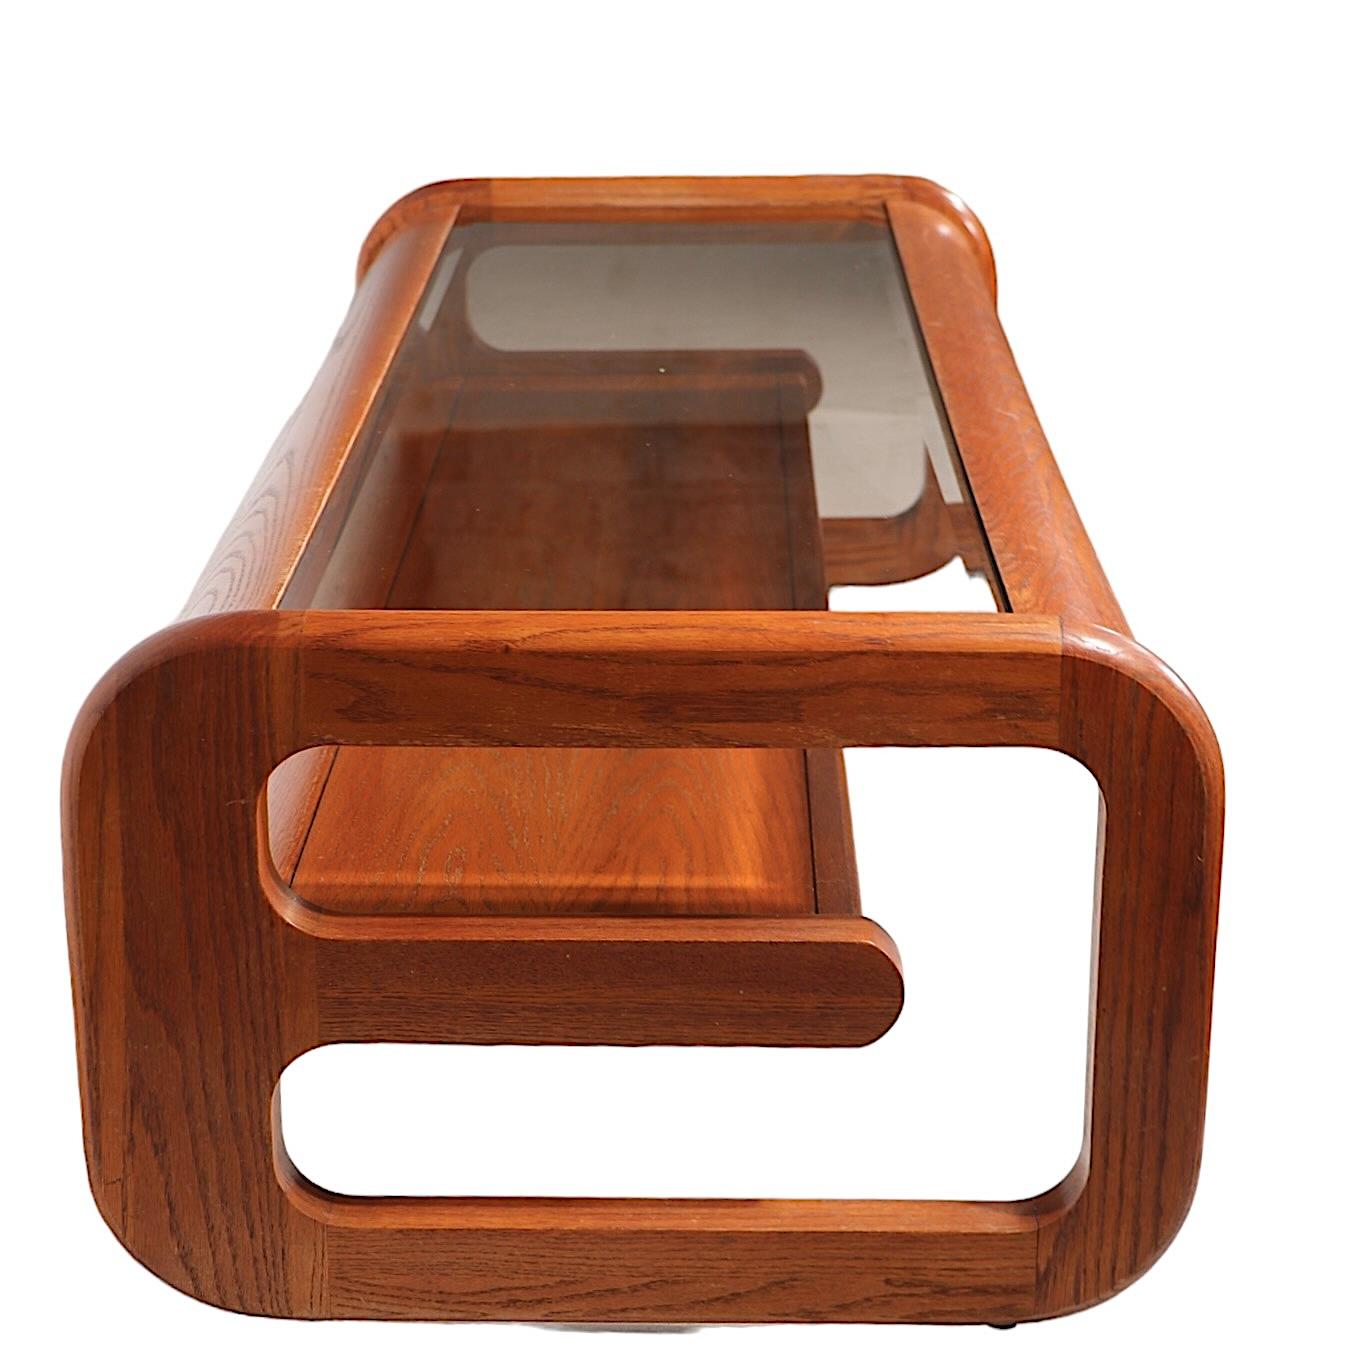 Post-Modern  Post Modern Oak and Glass Coffee Table by Lou Hodges for Mersman  c. 1970's For Sale